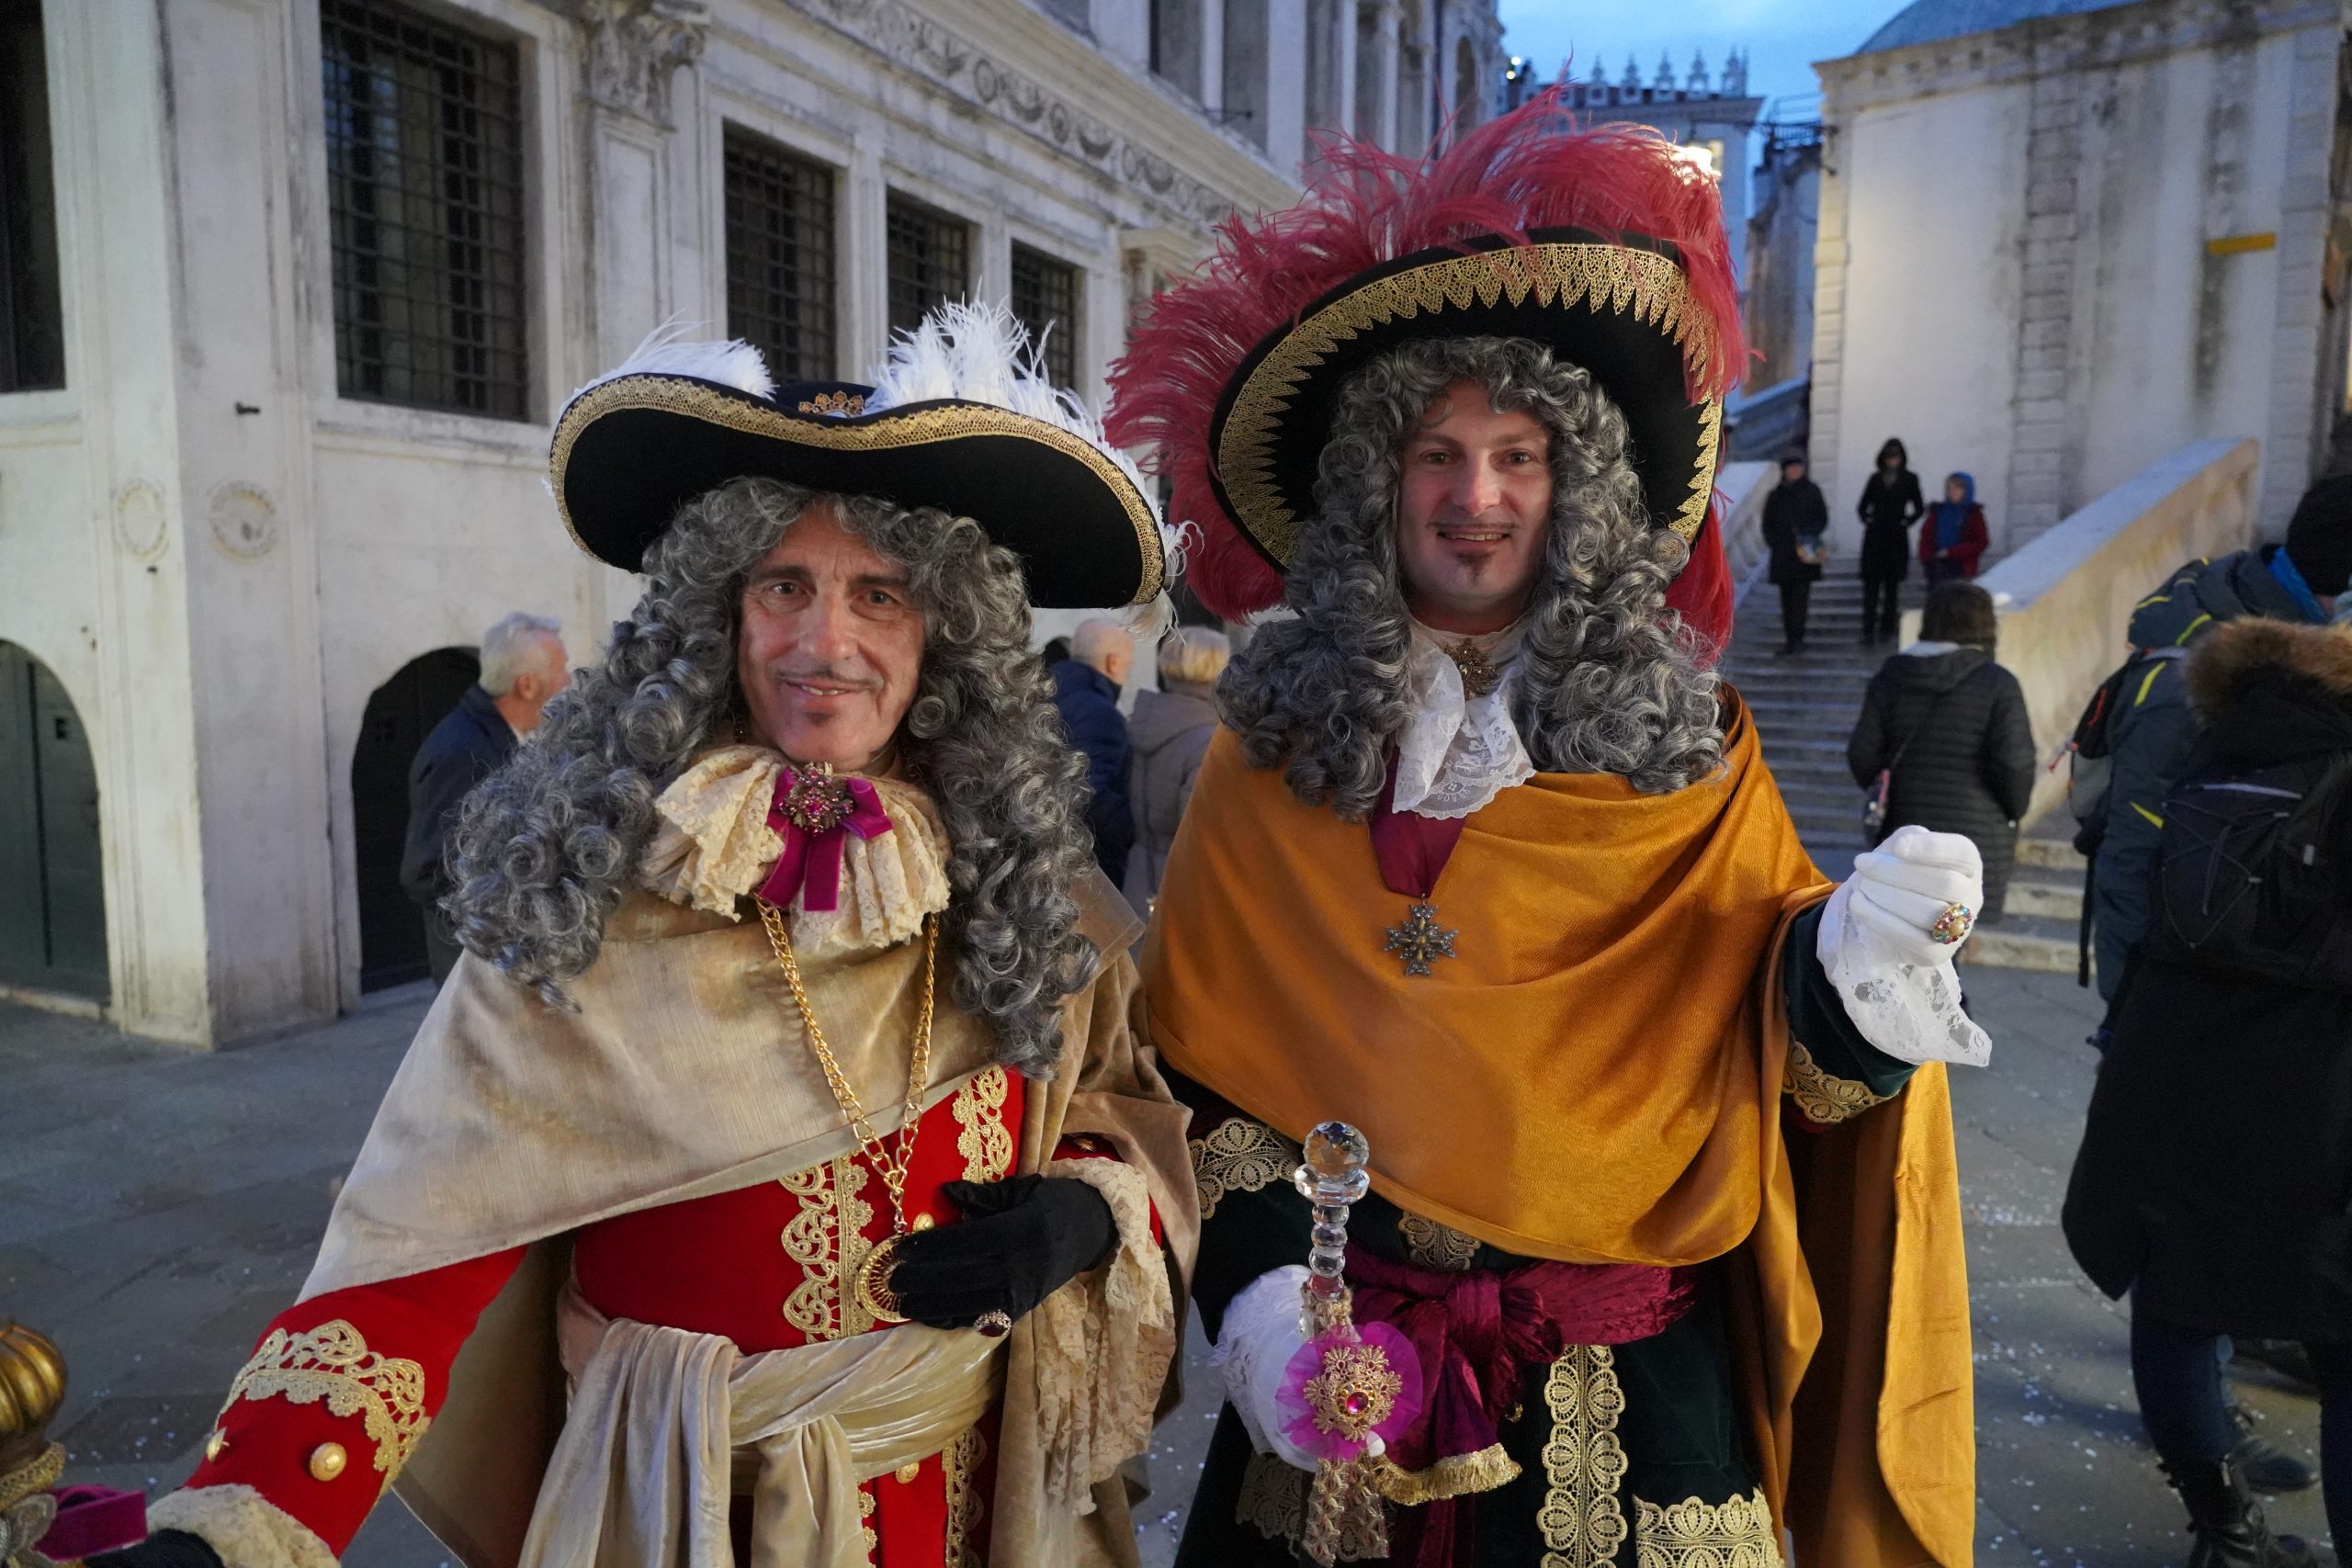 The Carnival of Venice brings out the revelers.